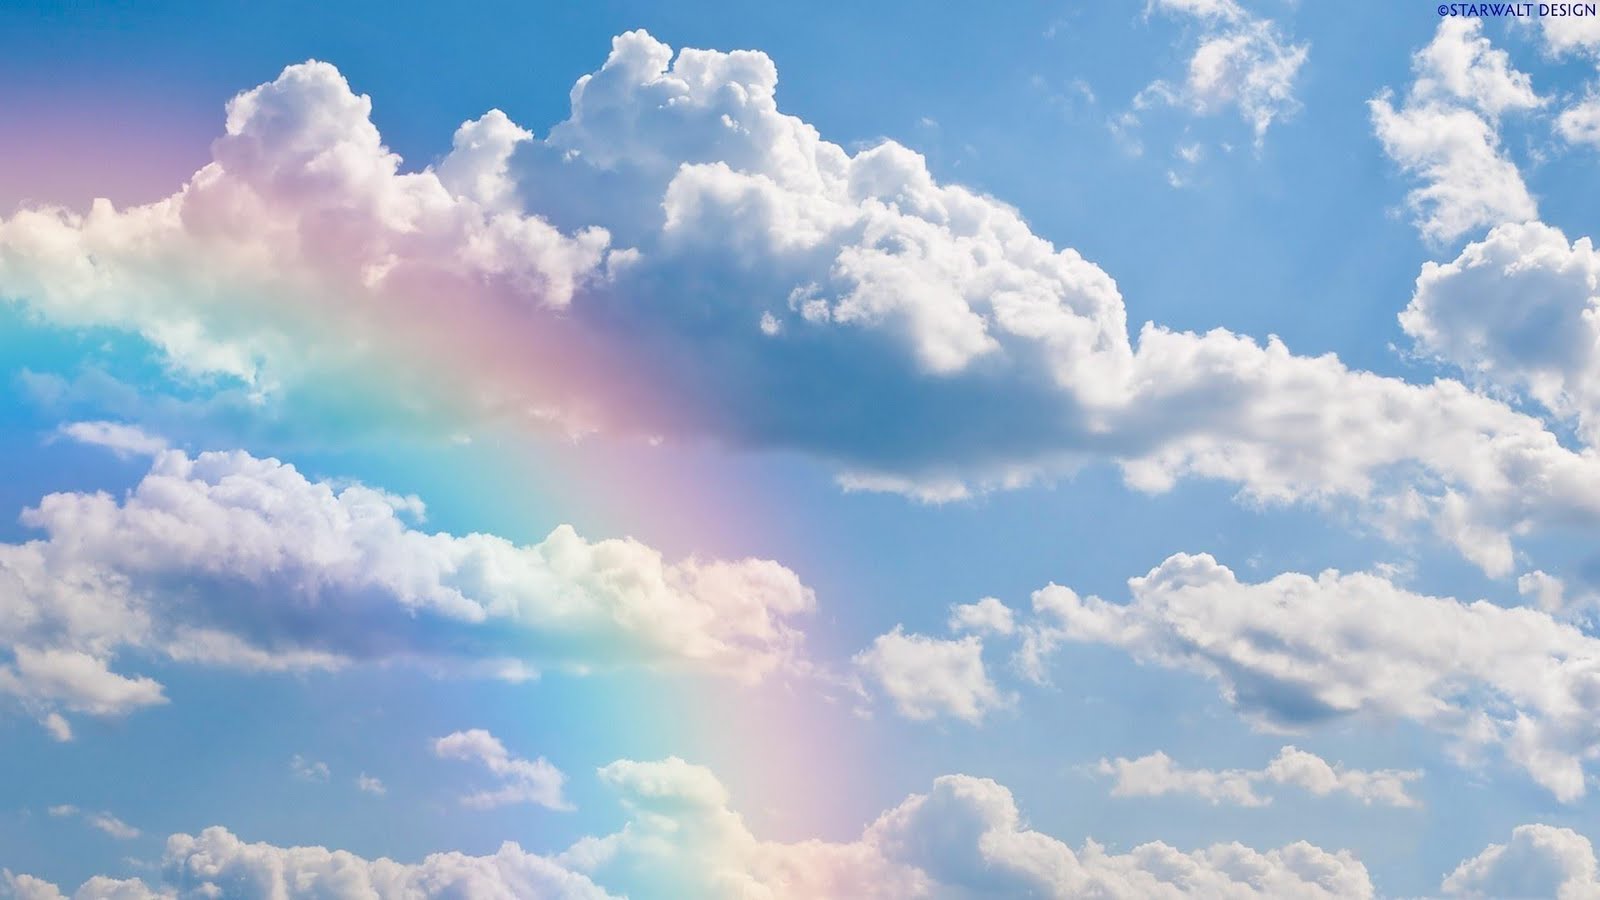 Rainbow and clouds desktop wallpapers backgrounds